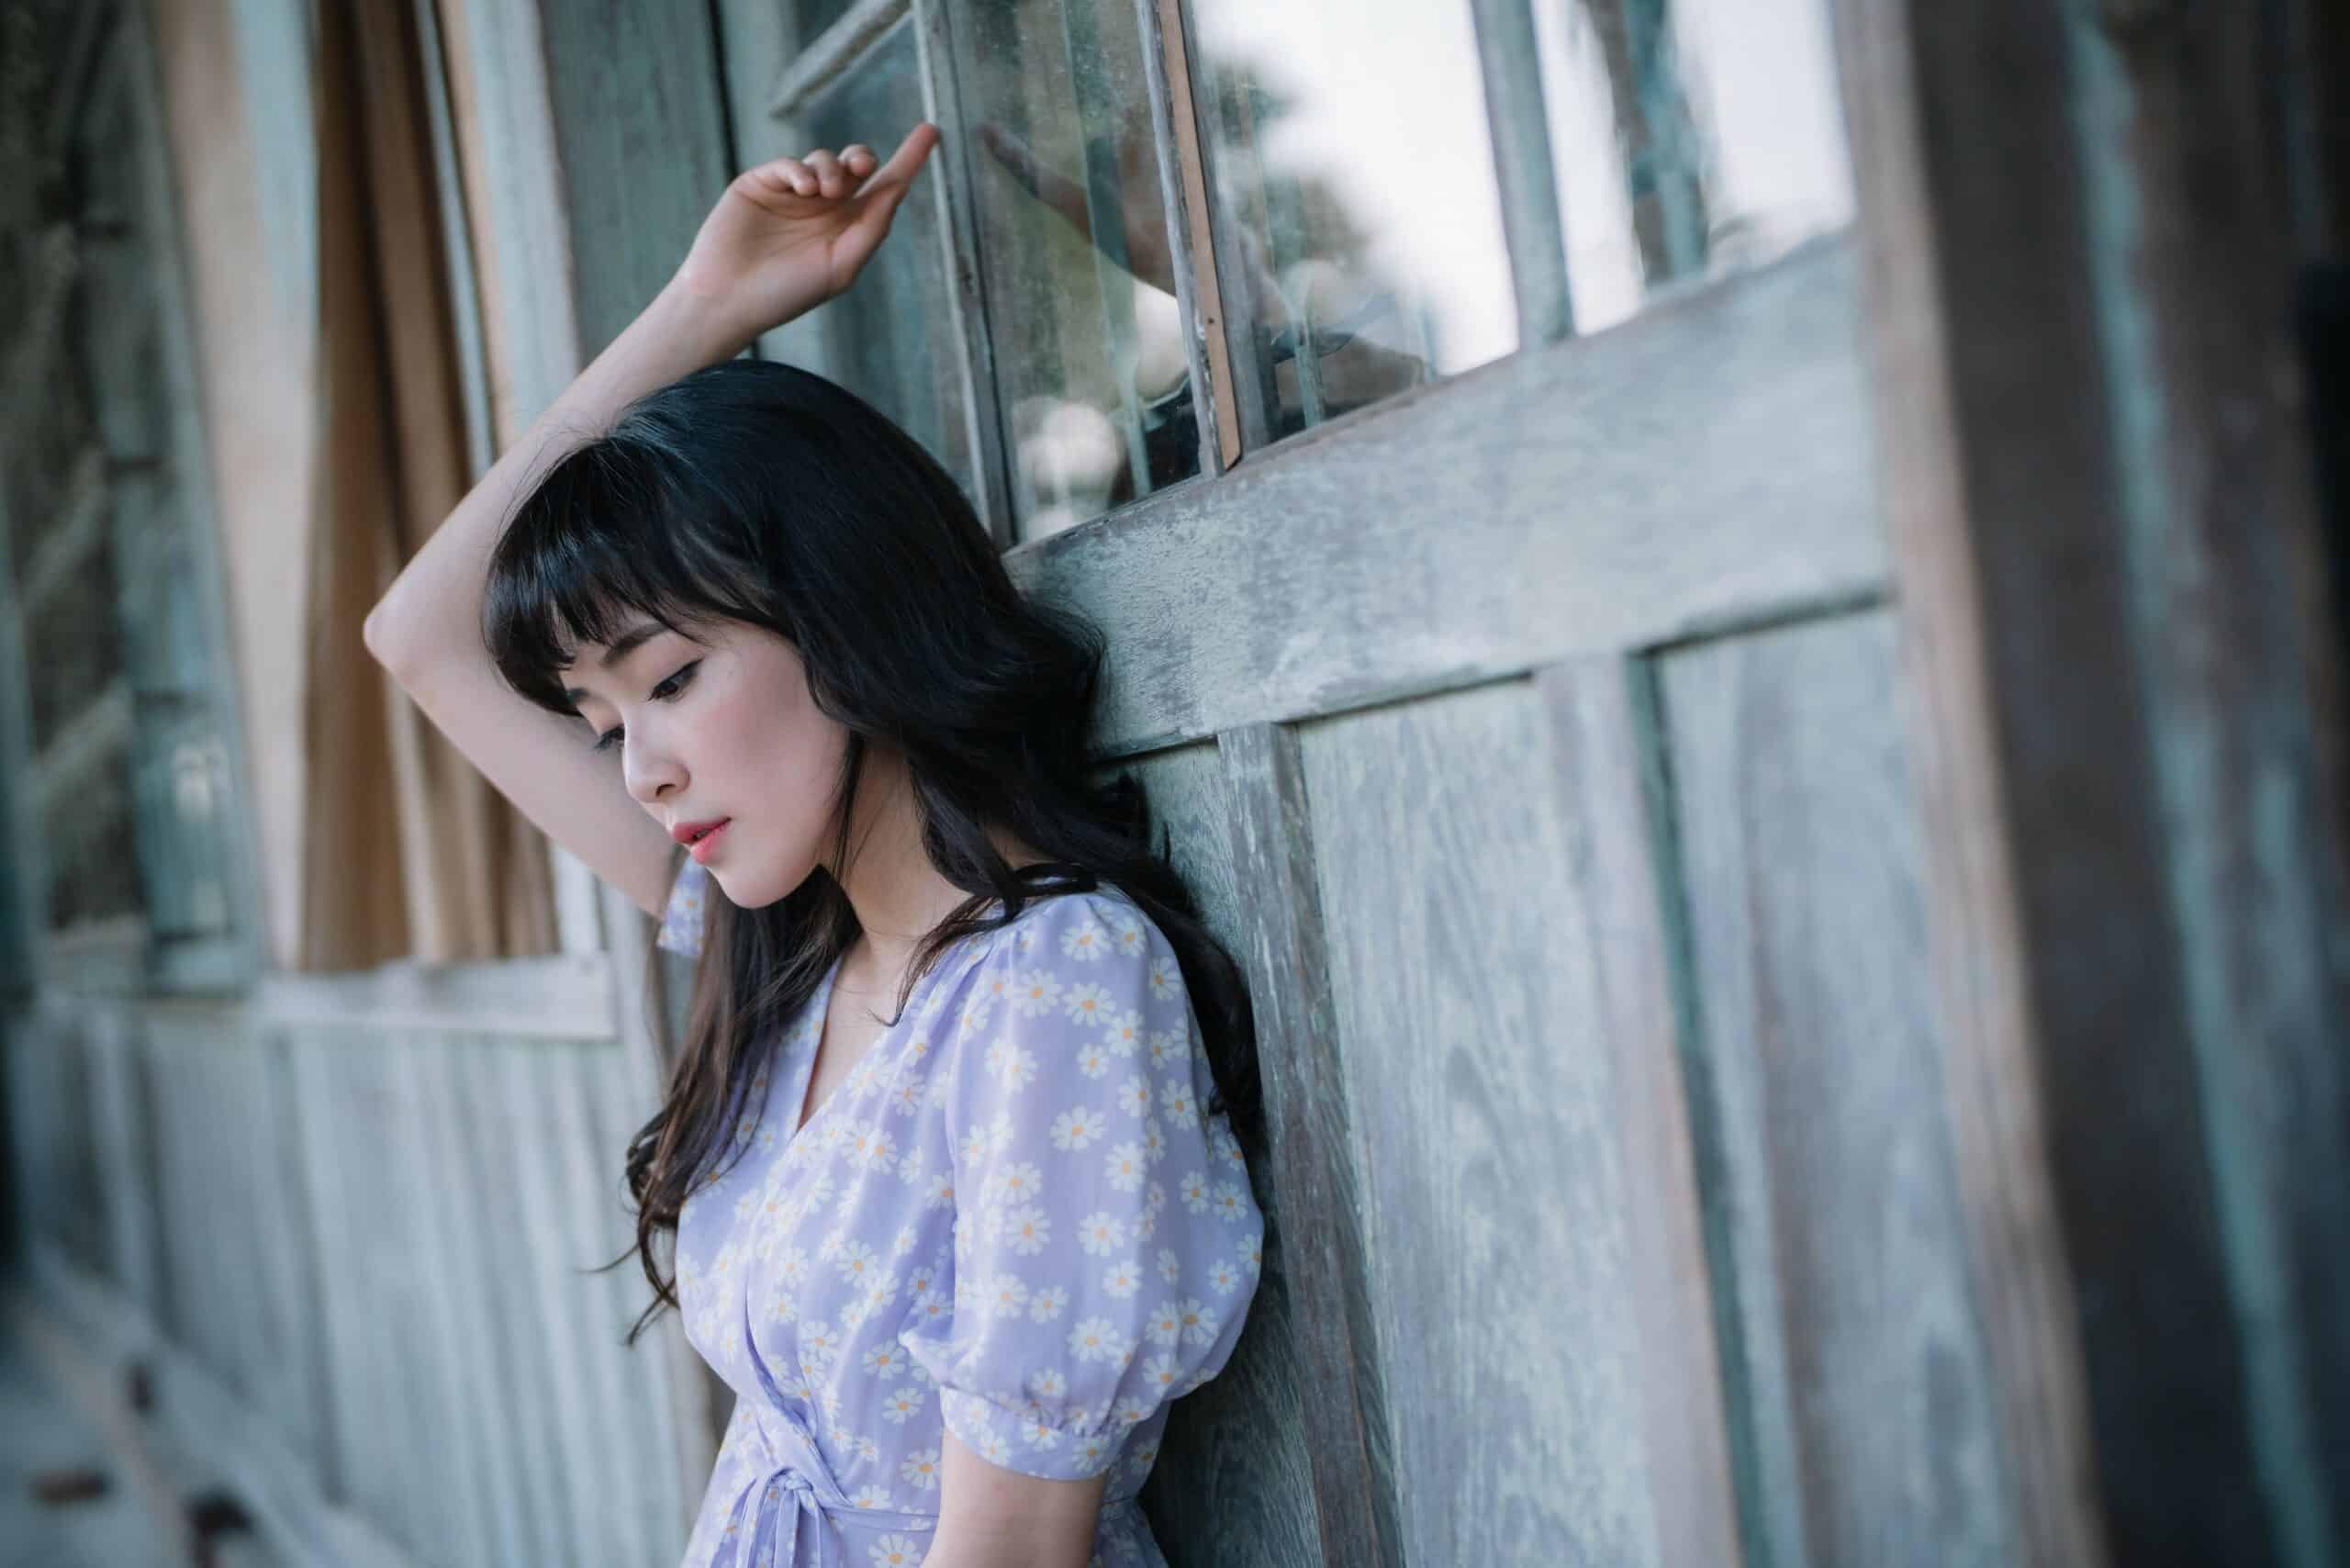 Pretty Asian girl outdoor in the countryside standing by wooden door in rustic theme.